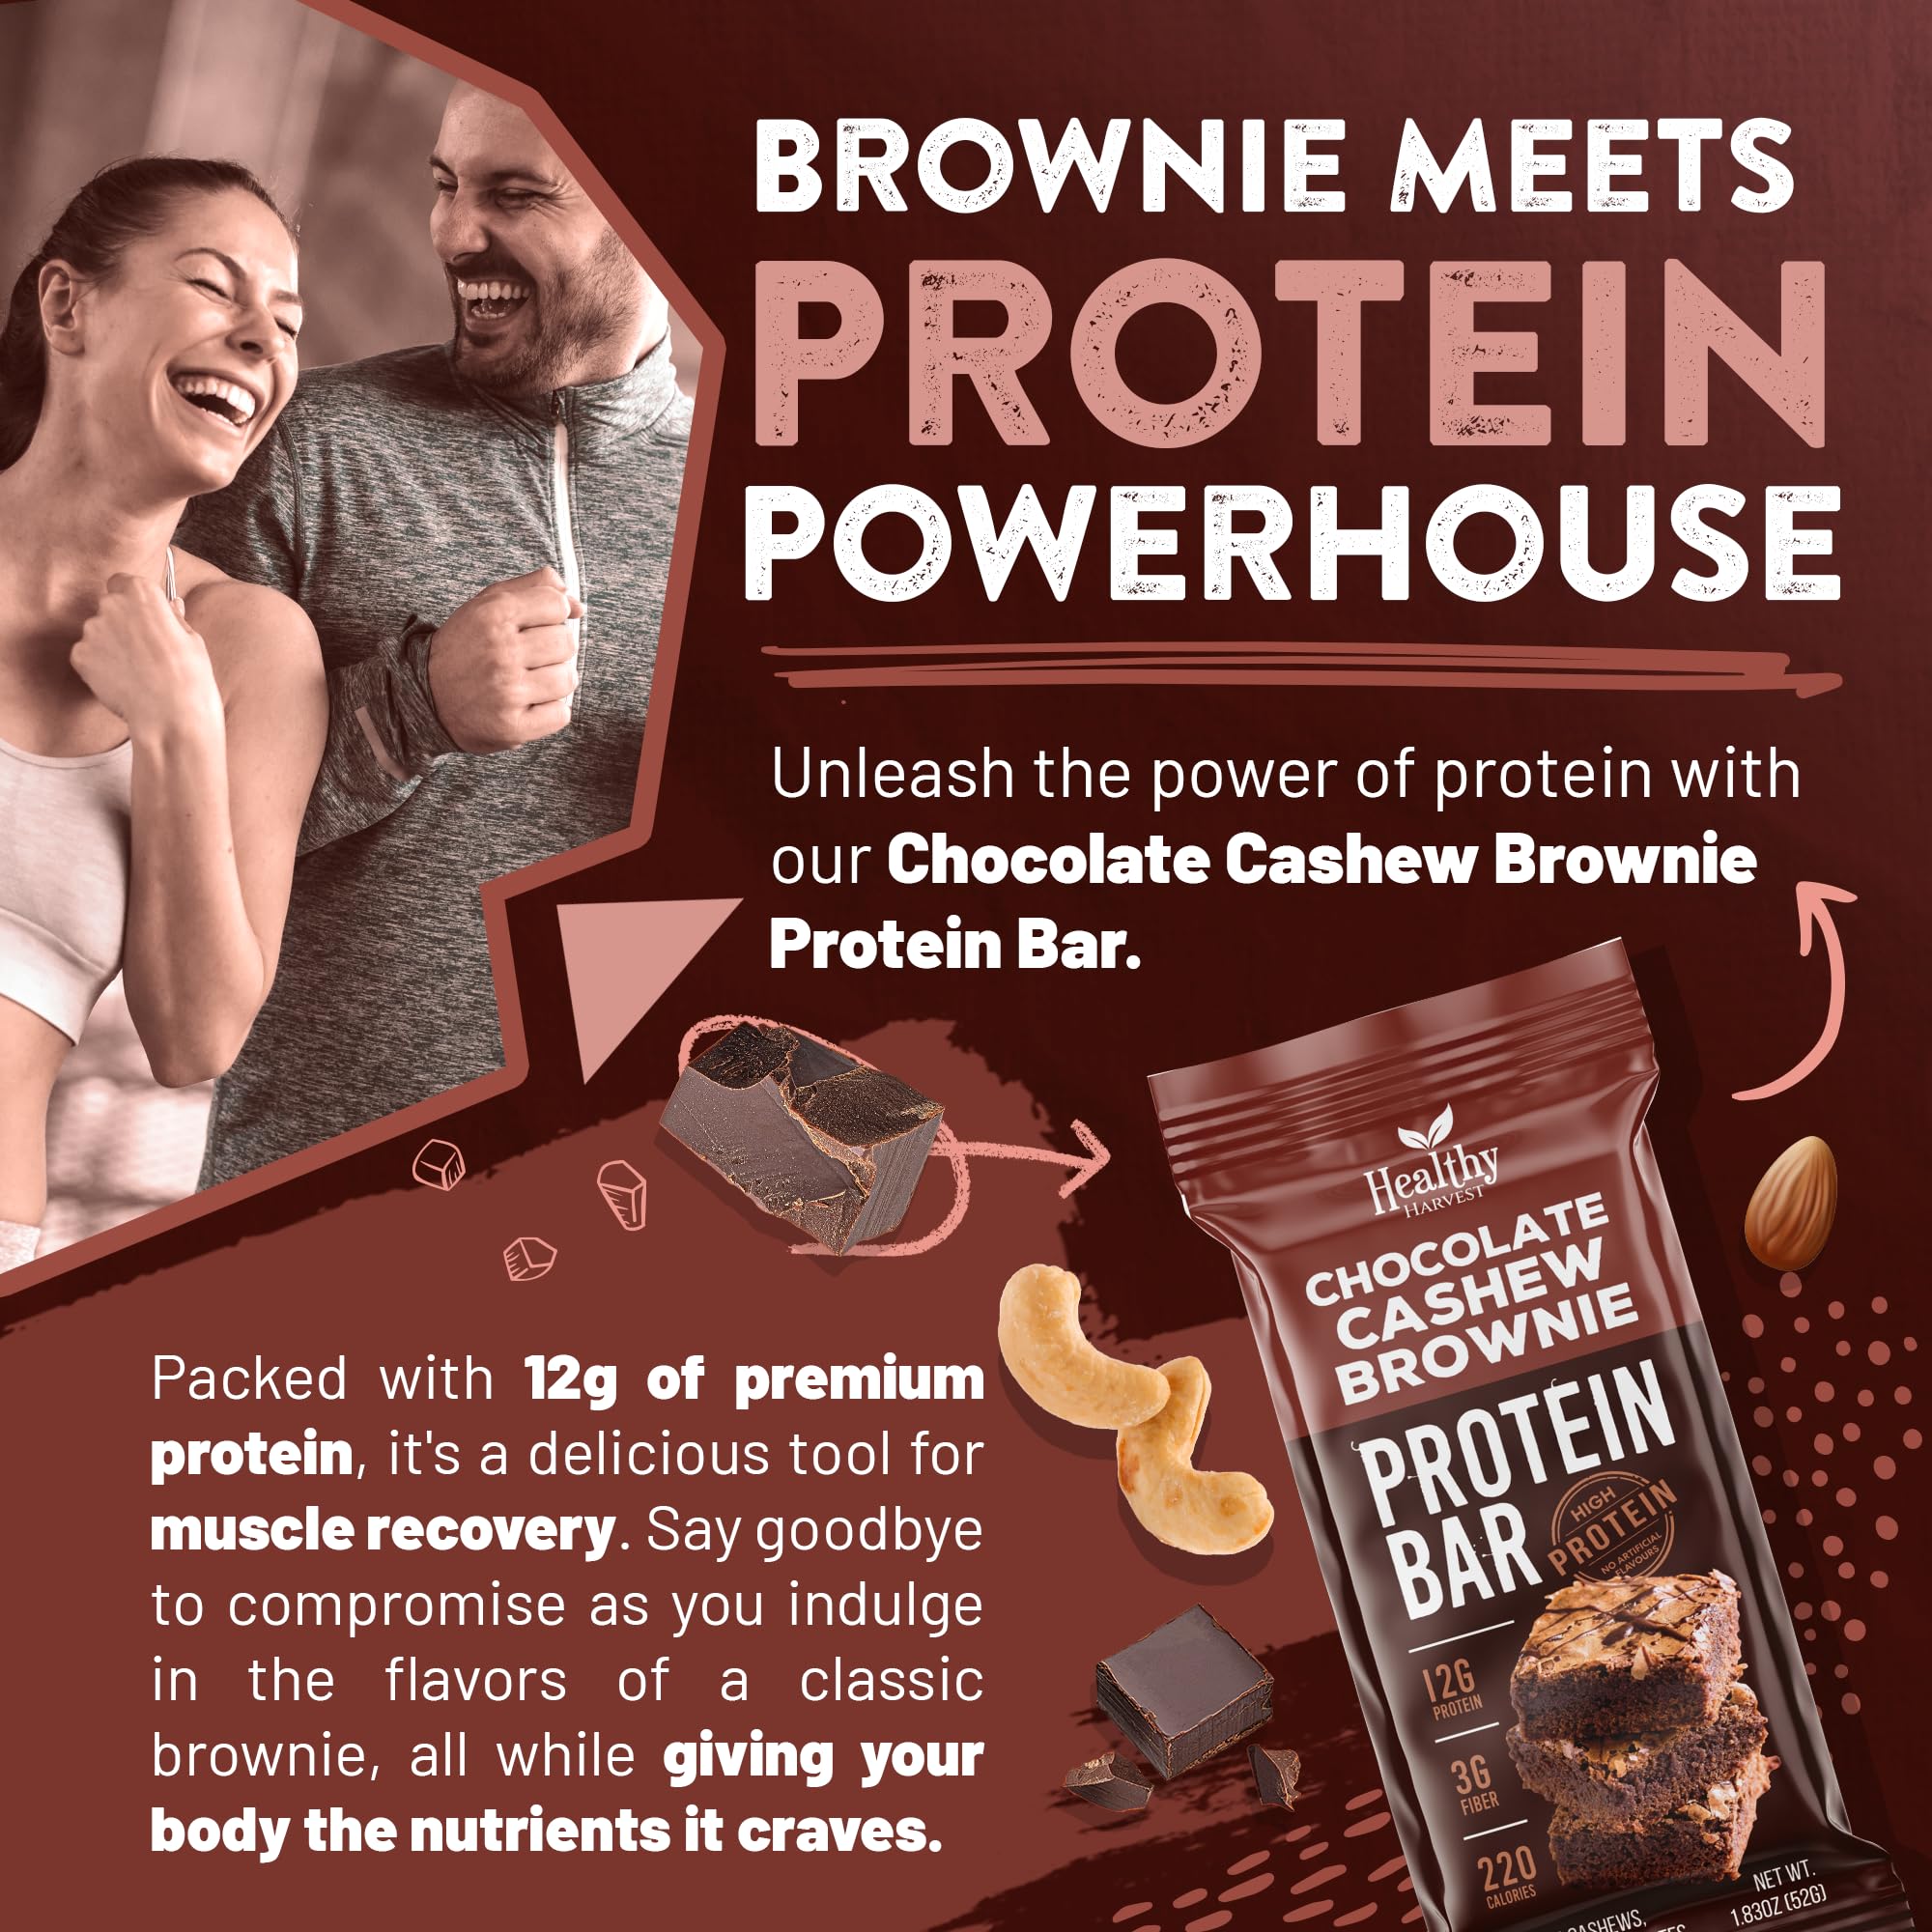 Chocolate Brownie Protein Bar, Healthy Real Whole Food High Protein Snack Made with 6 Simple Clean Natural Ingredients, Gluten, Dairy, Soy and B.S. Free, No Sugar Added, 6 Bars